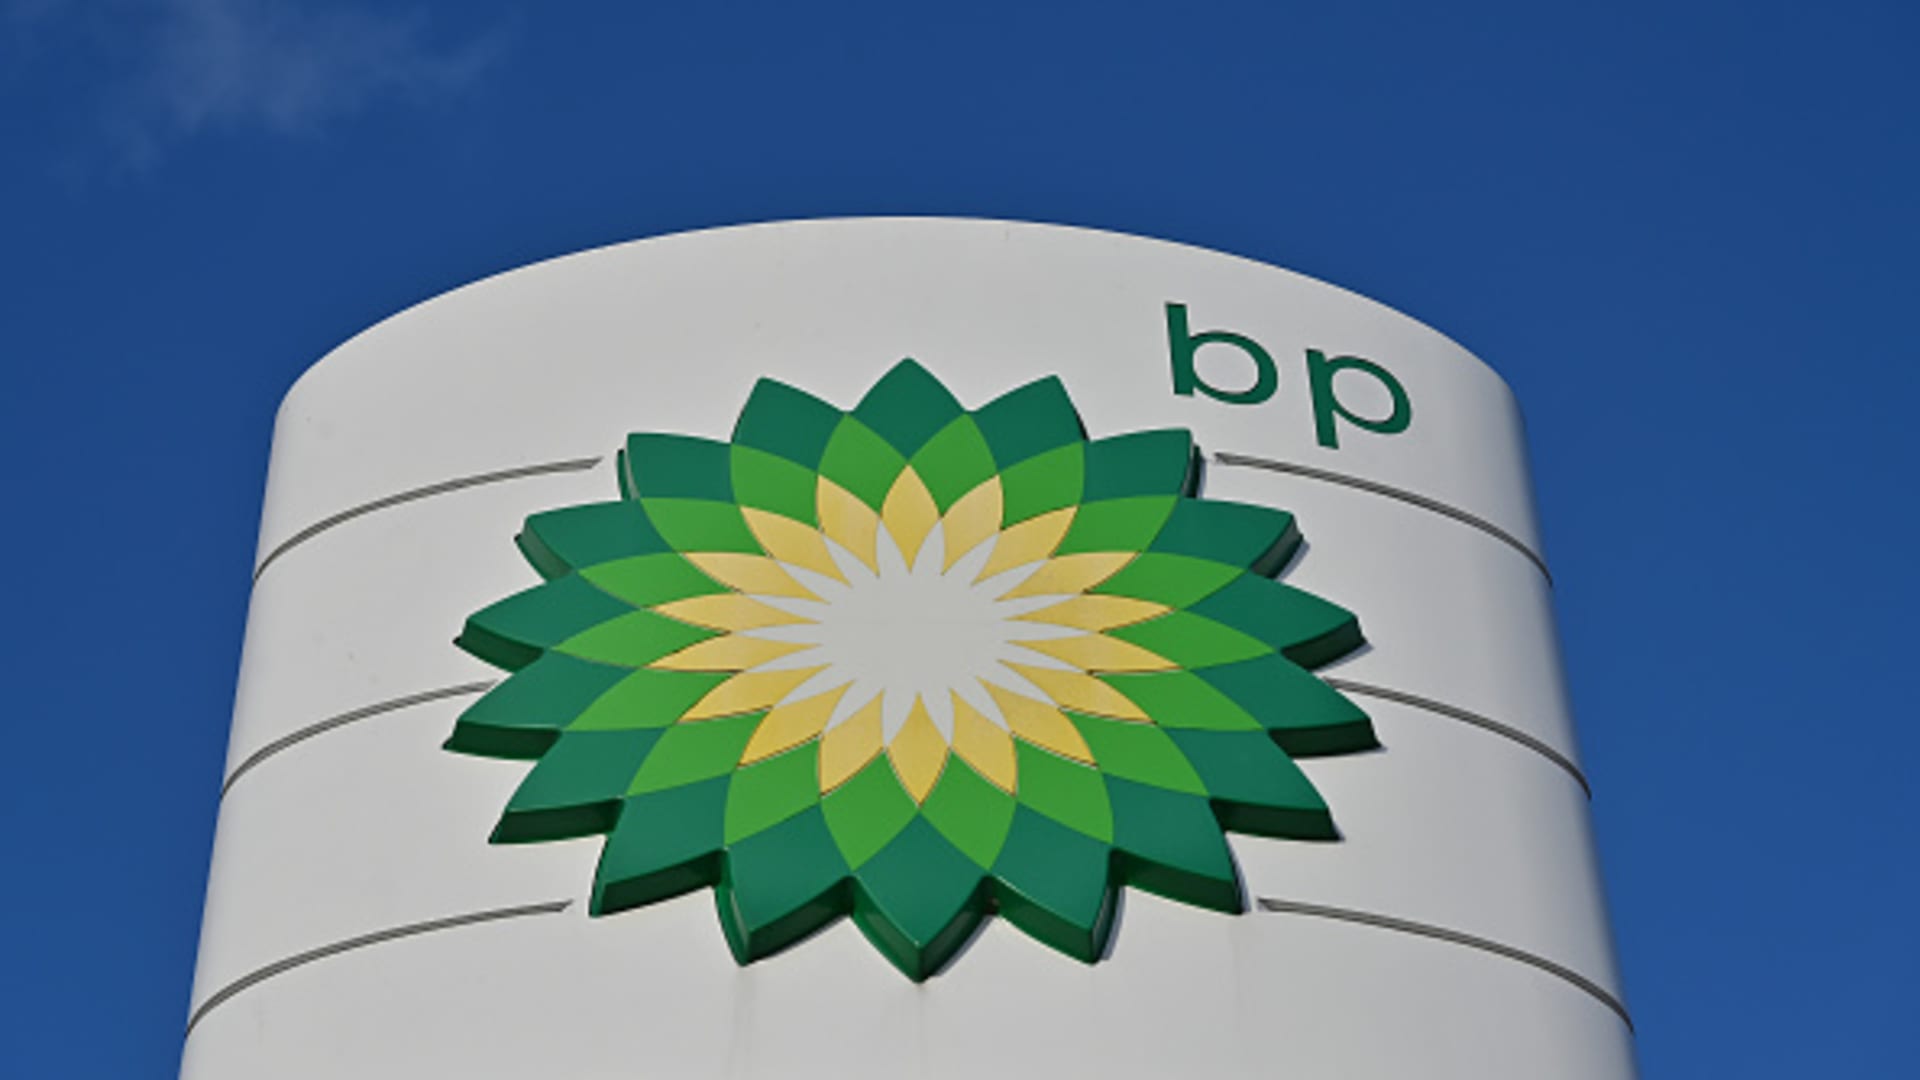 BP trims down executive team, picks new head of its fuel and lower carbon energy organization